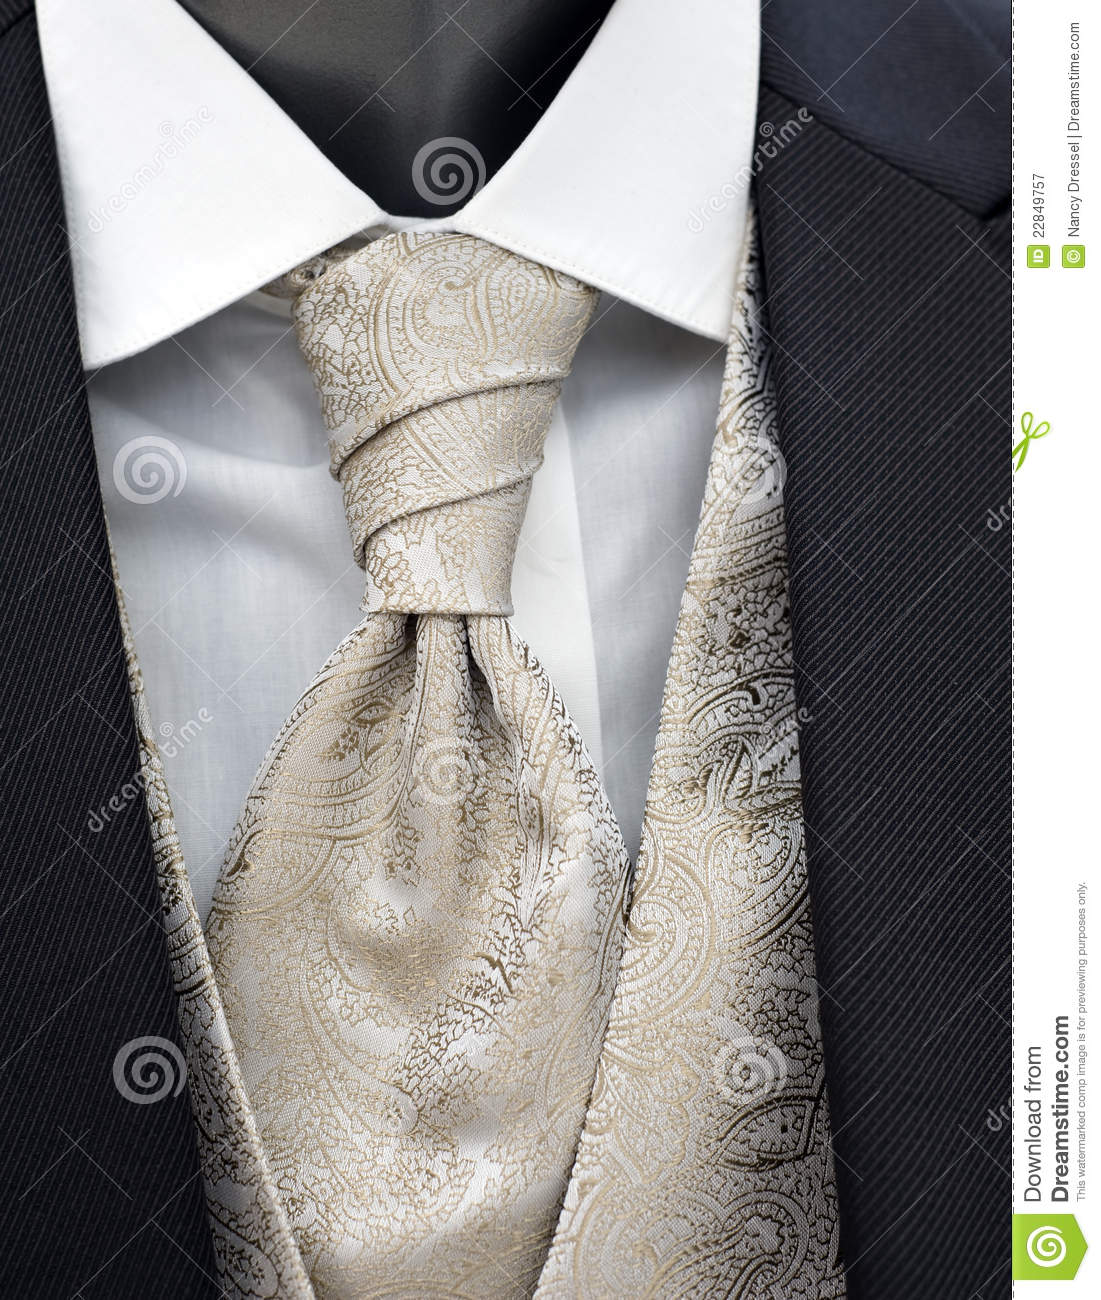 Part Of A Beautiful Black Wedding Tuxedo For Men With Silver Pattern    